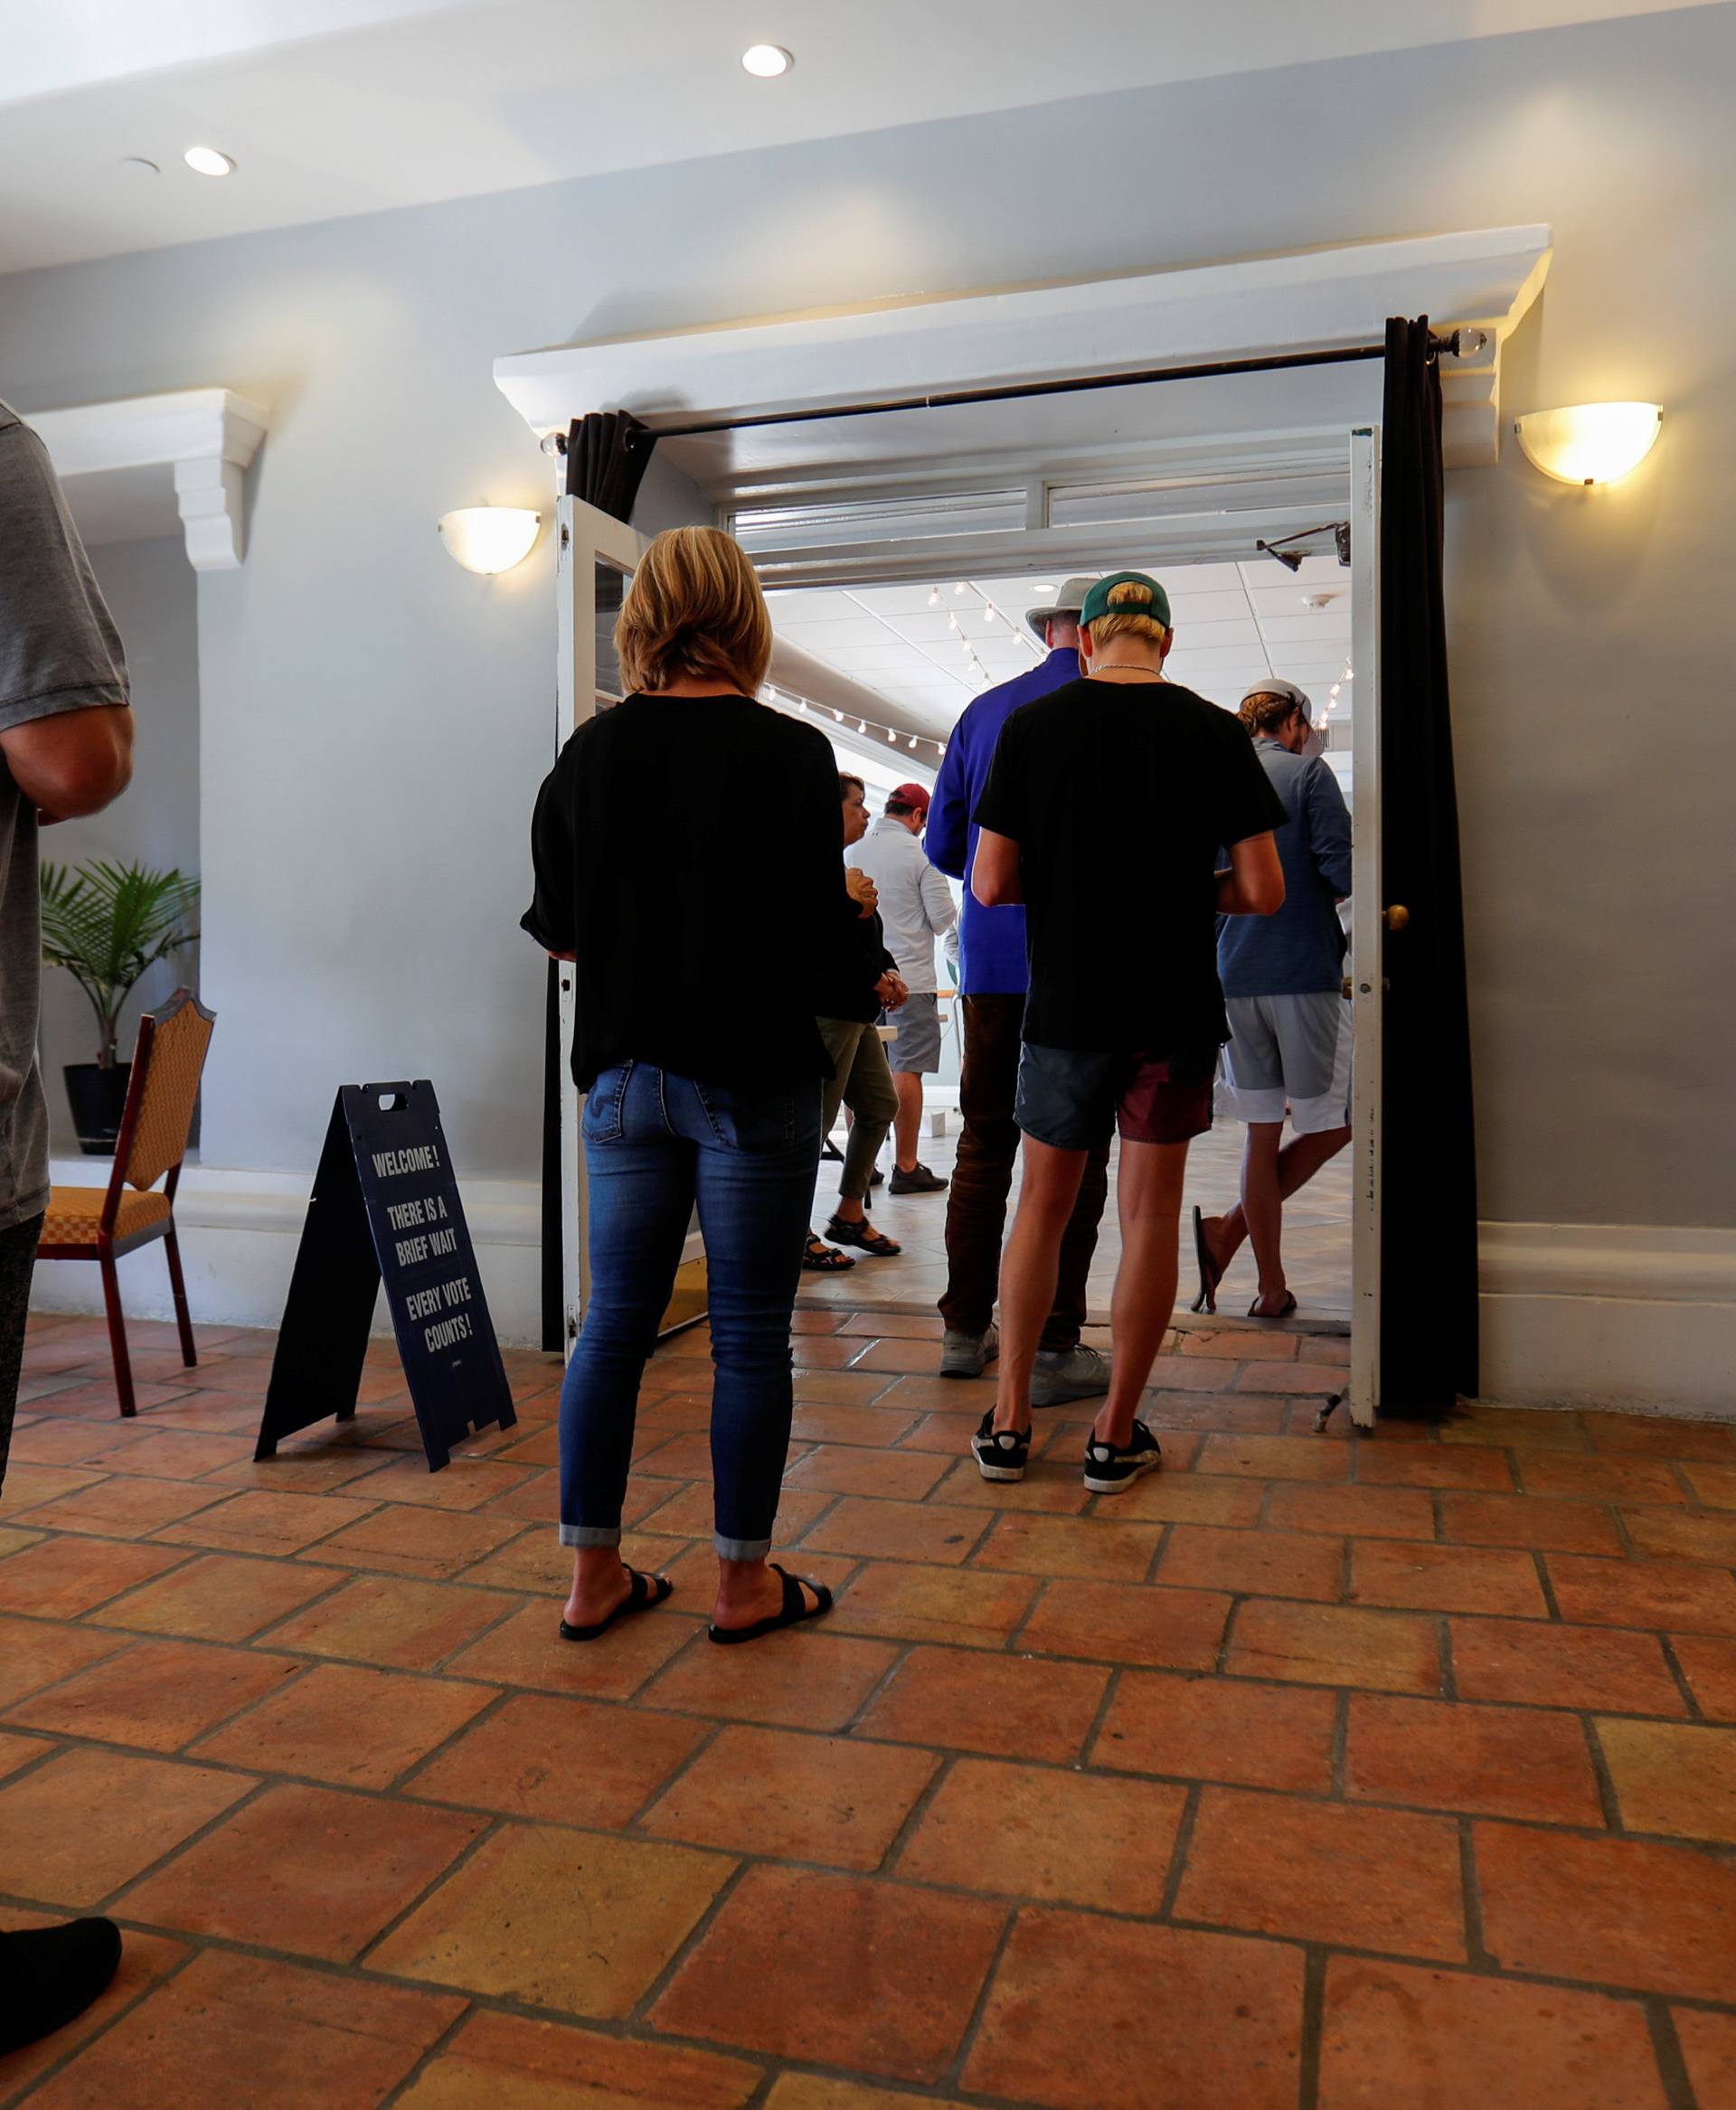 Voters wait in line to cast their ballot during midterm elections in Newport Beach, California